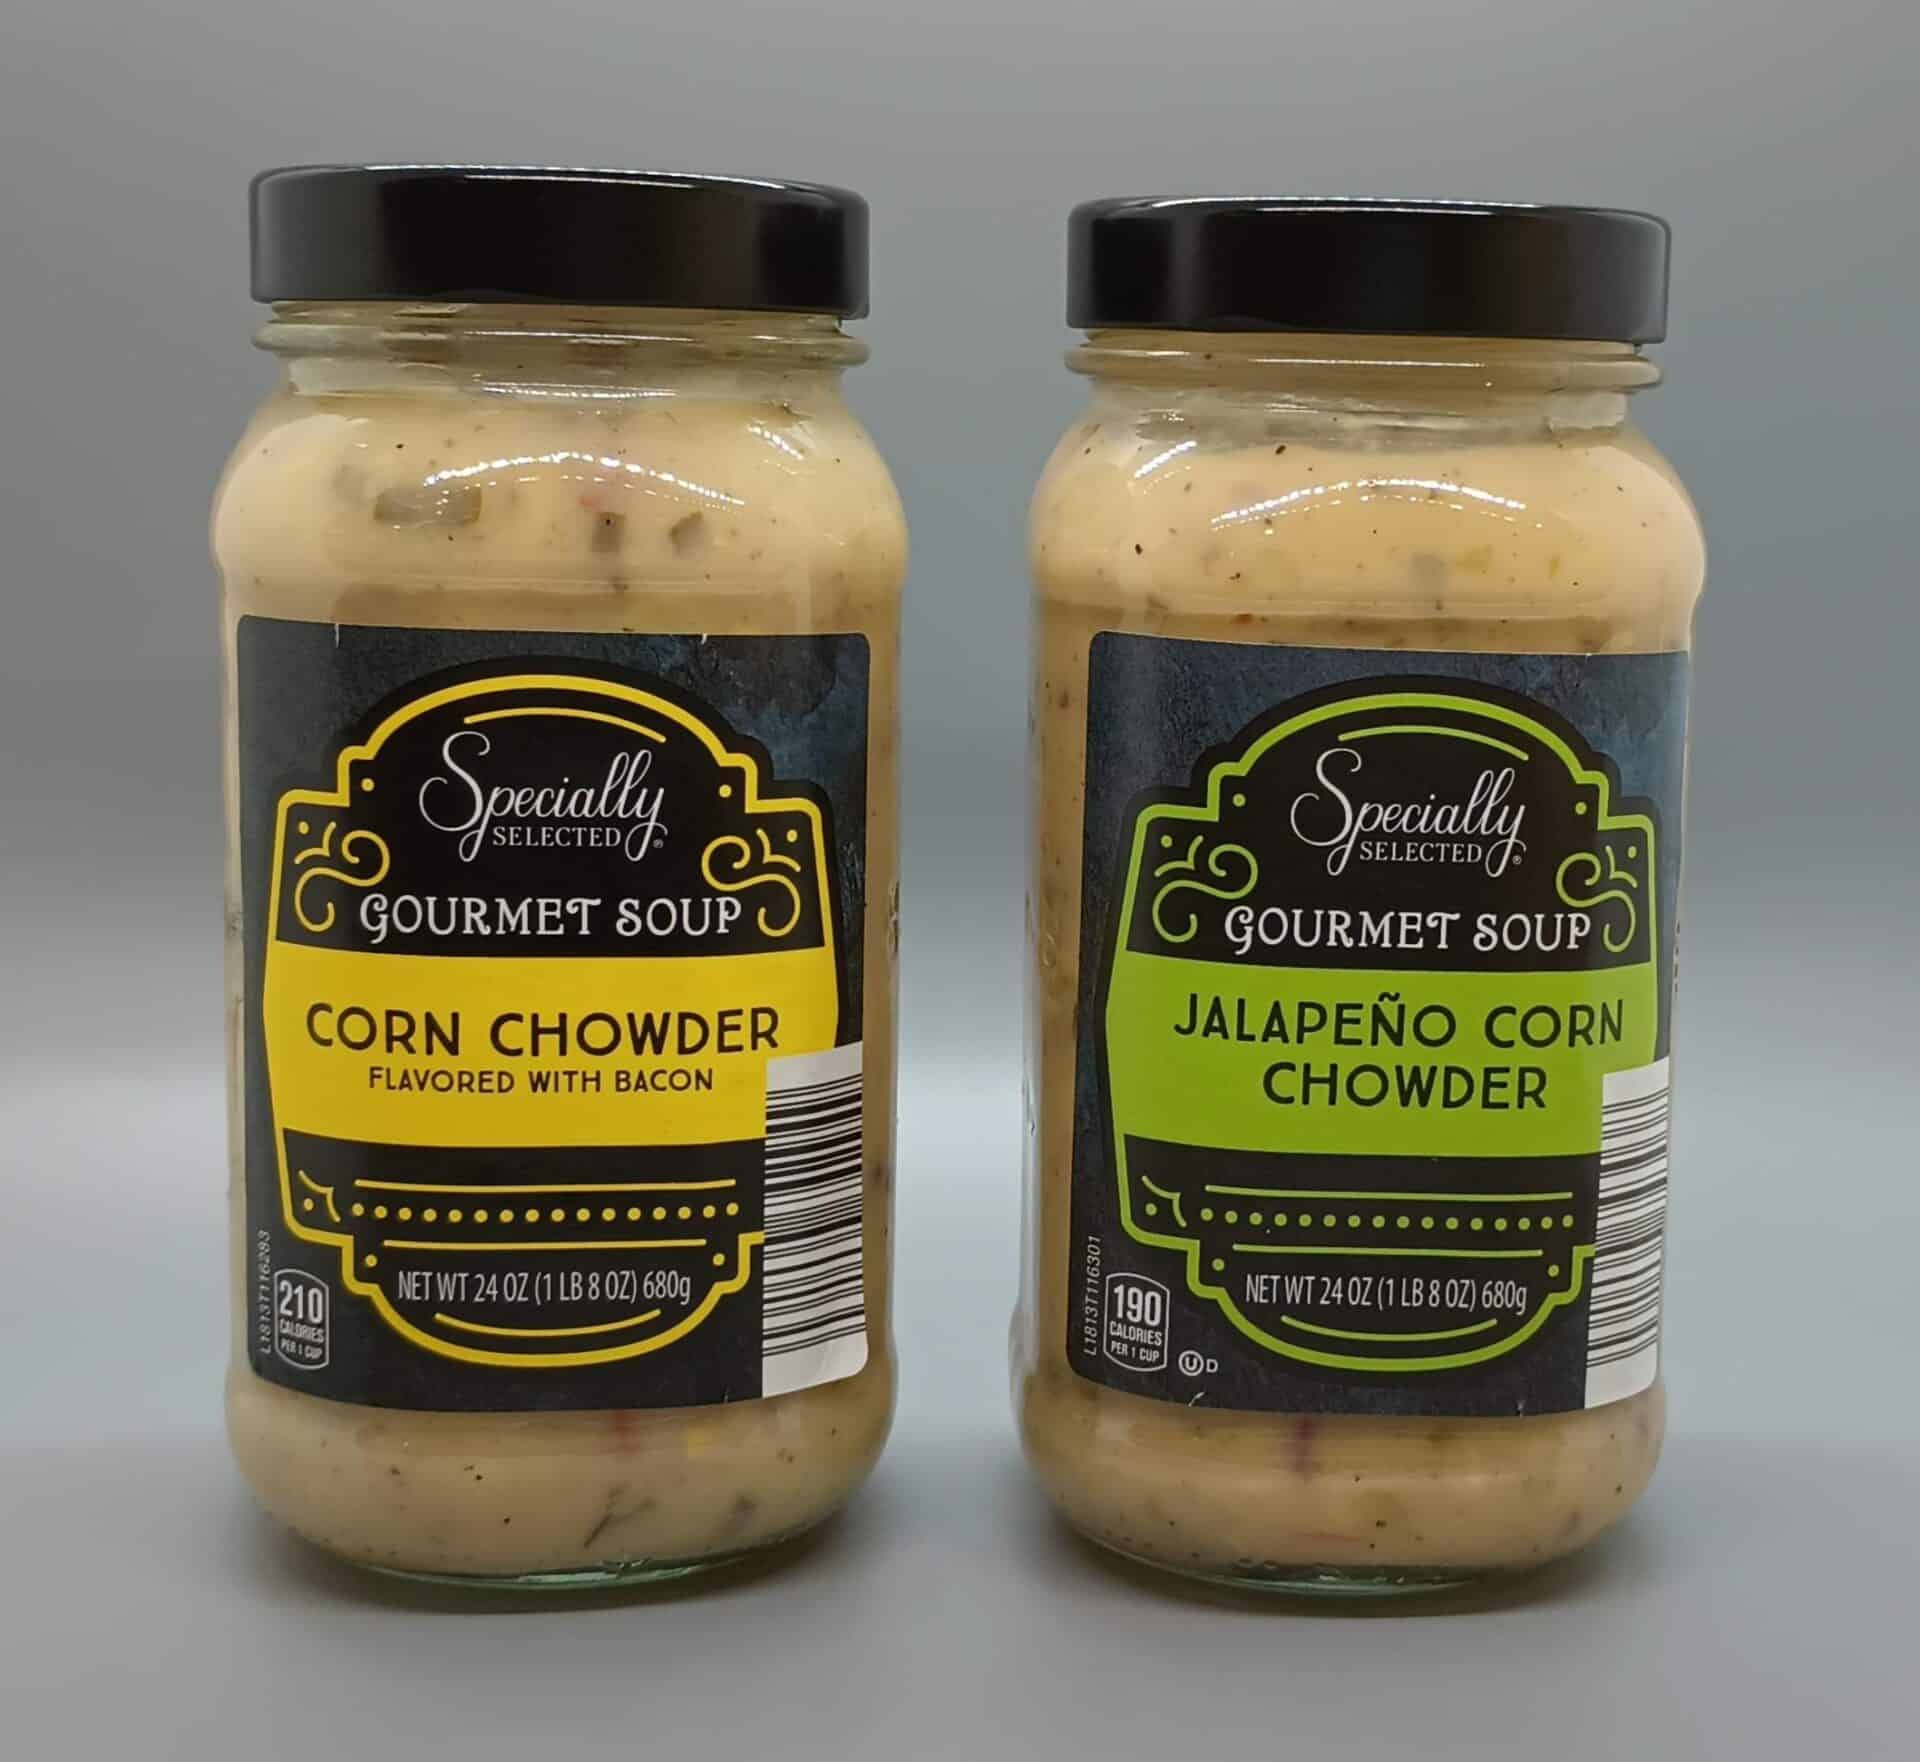 Specially Selected Gourmet Soup Corn Chowder and Specially Selected Soup Jalapeno Corn Chowder